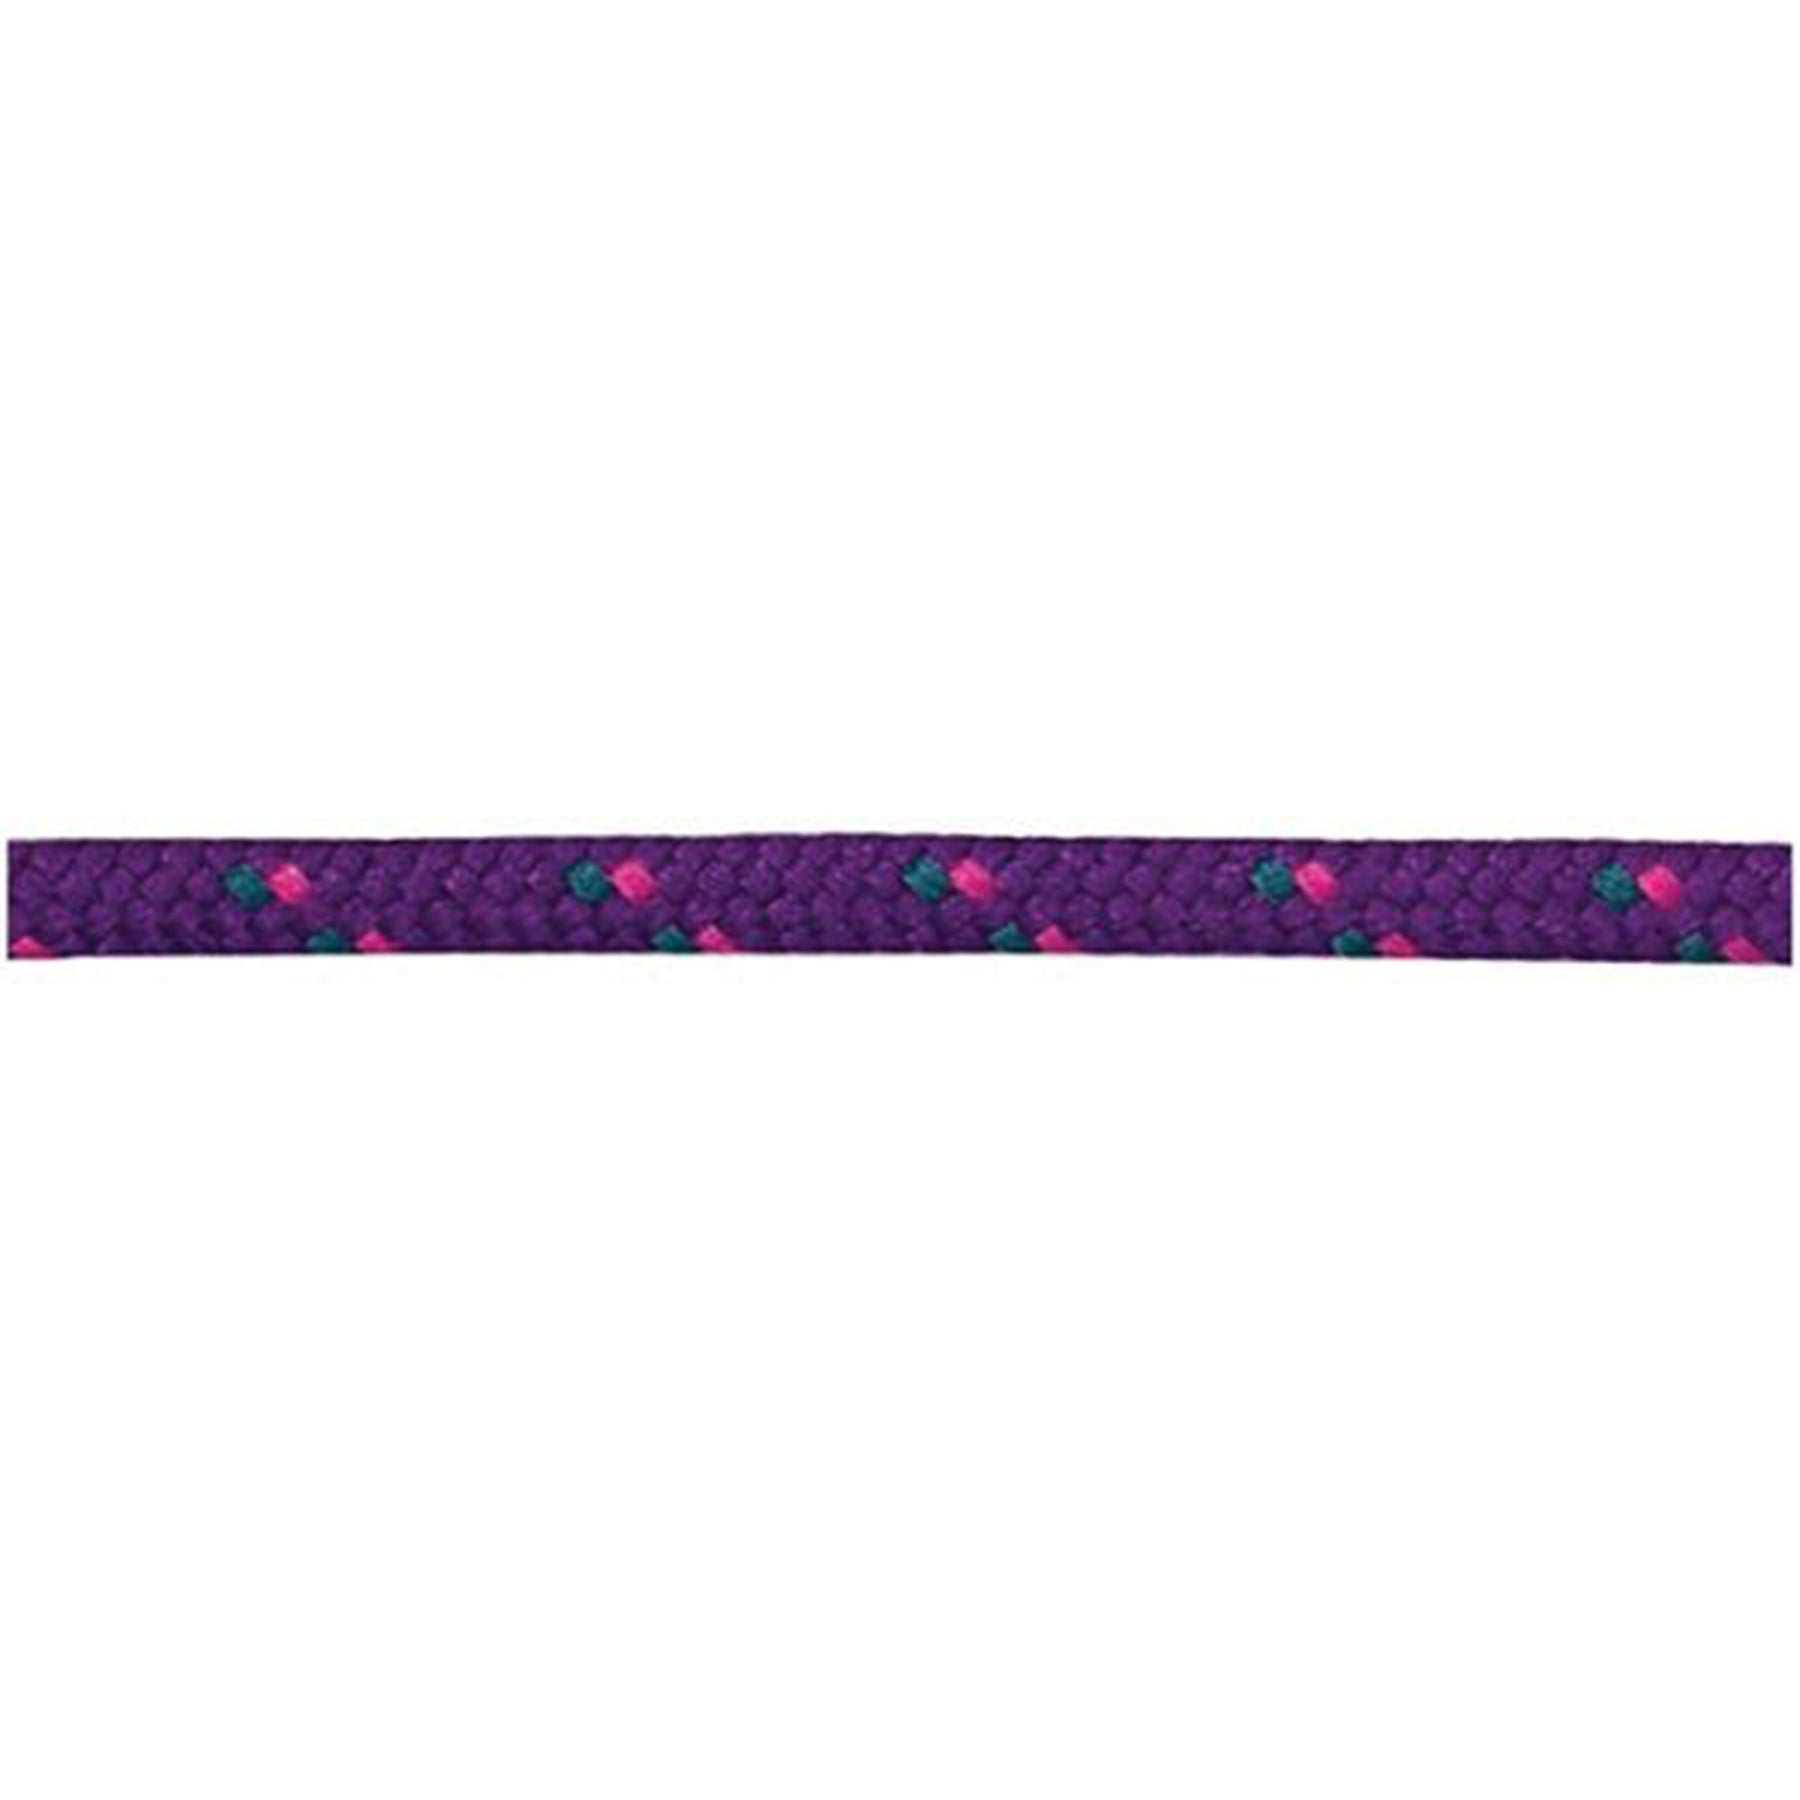 the purple spaghetti lace has accents of pink and green